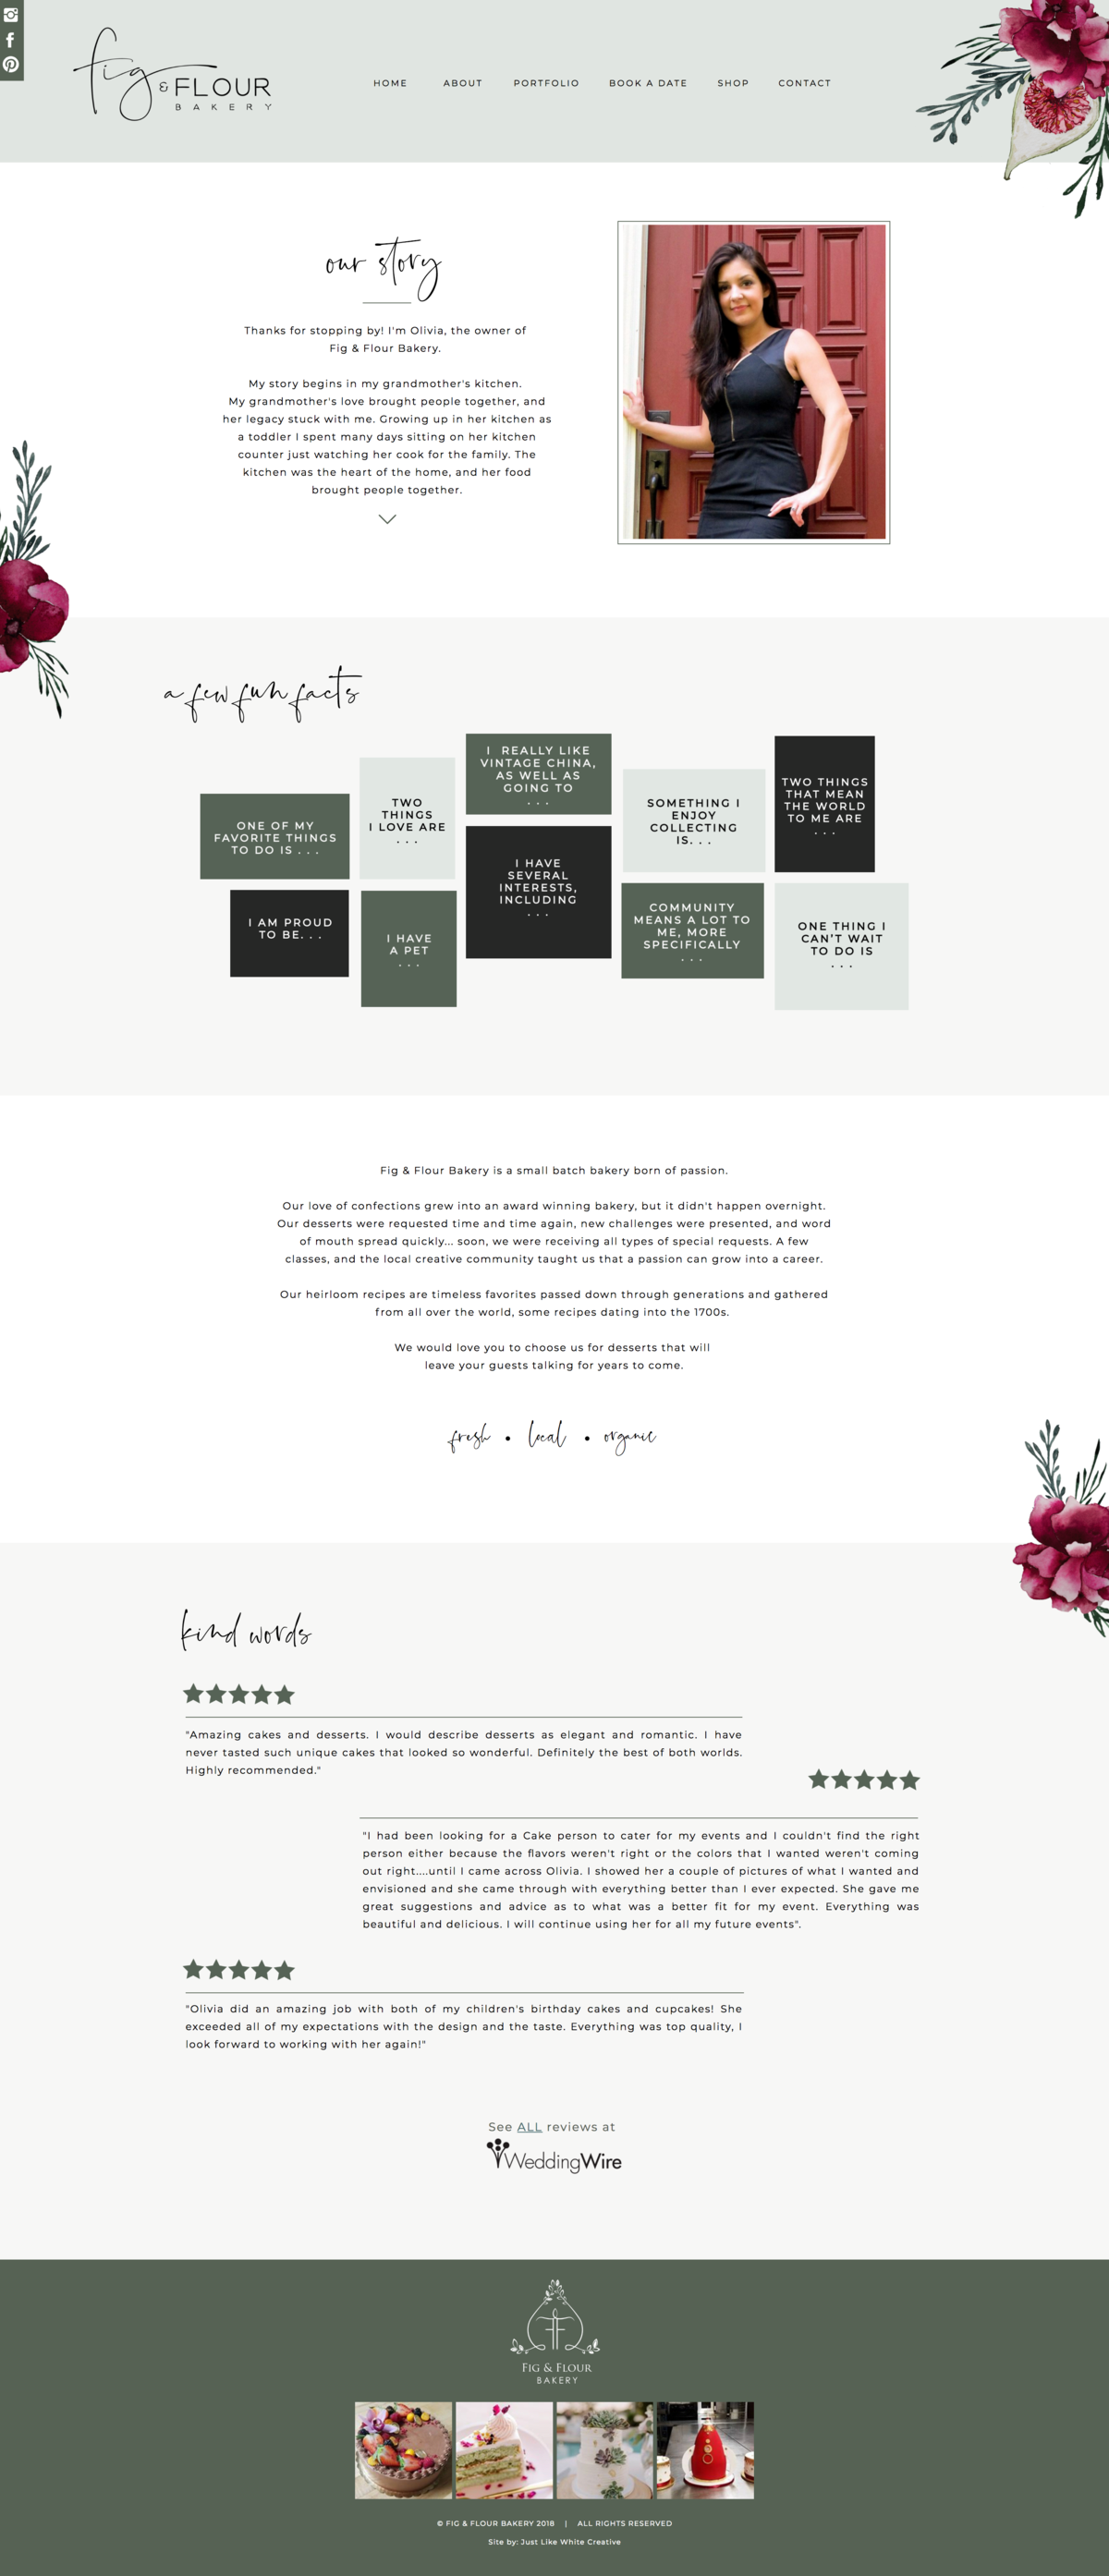 Flowery web design by Tribble Design Co.